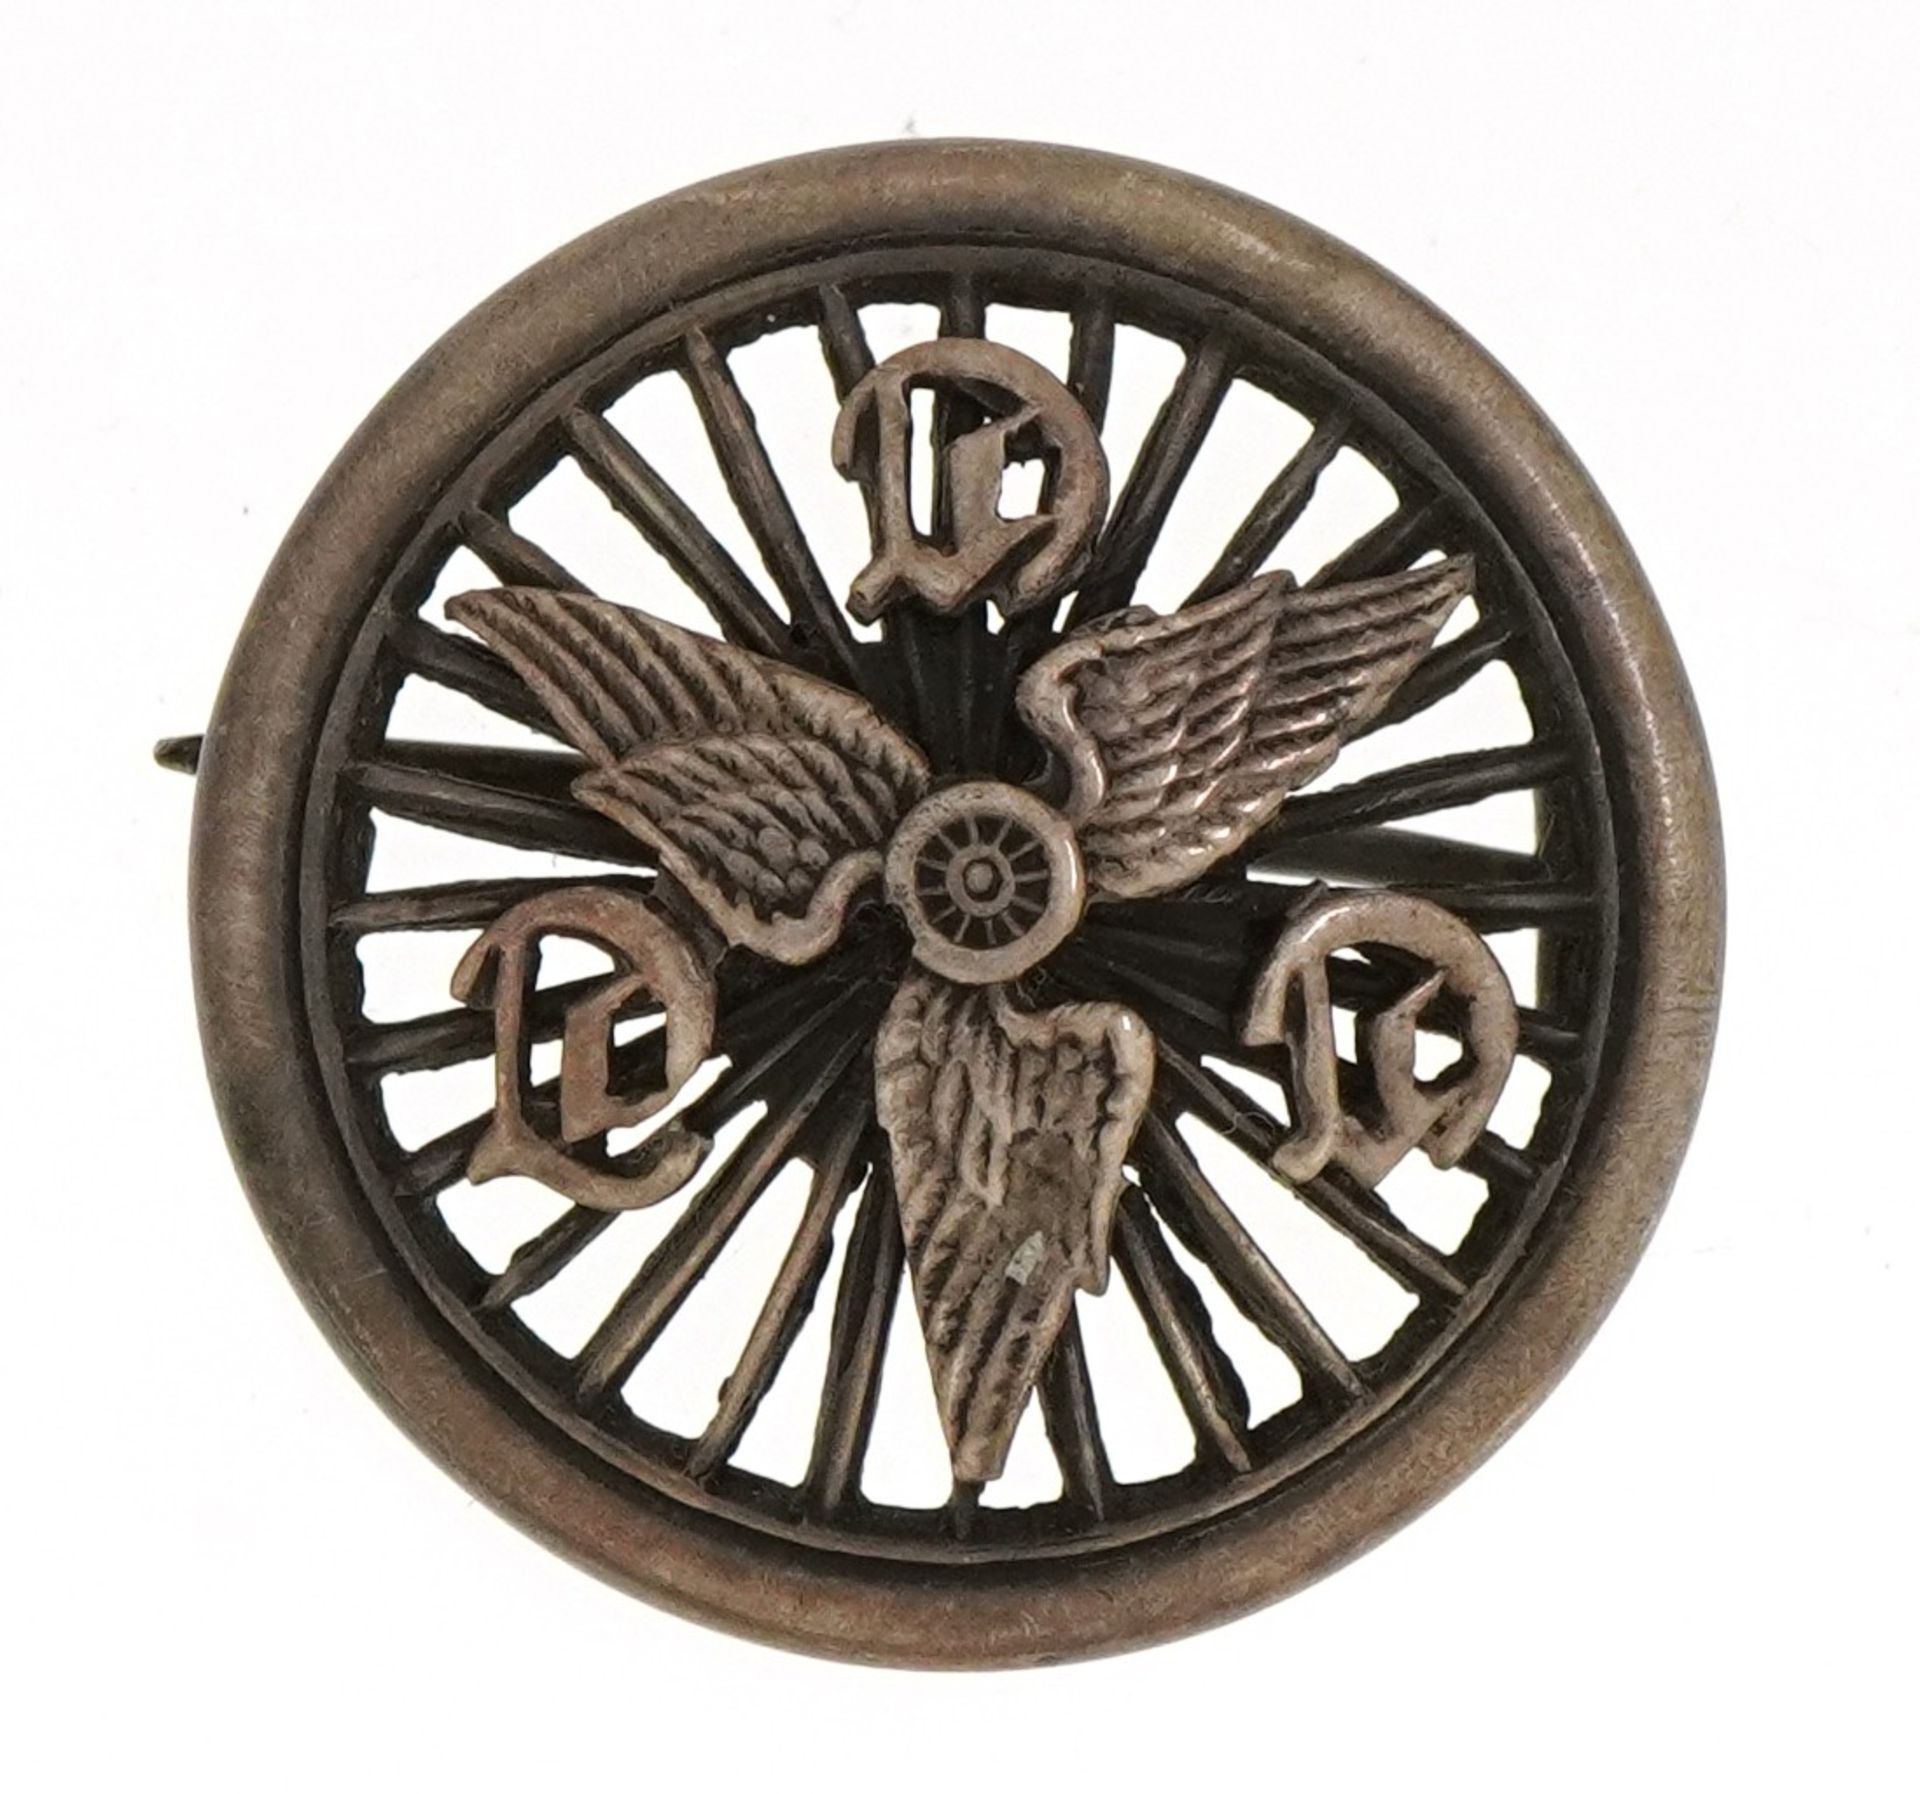 Cyclist's Touring Club silver brooch, 2.7cm in diameter : For further information on this lot please